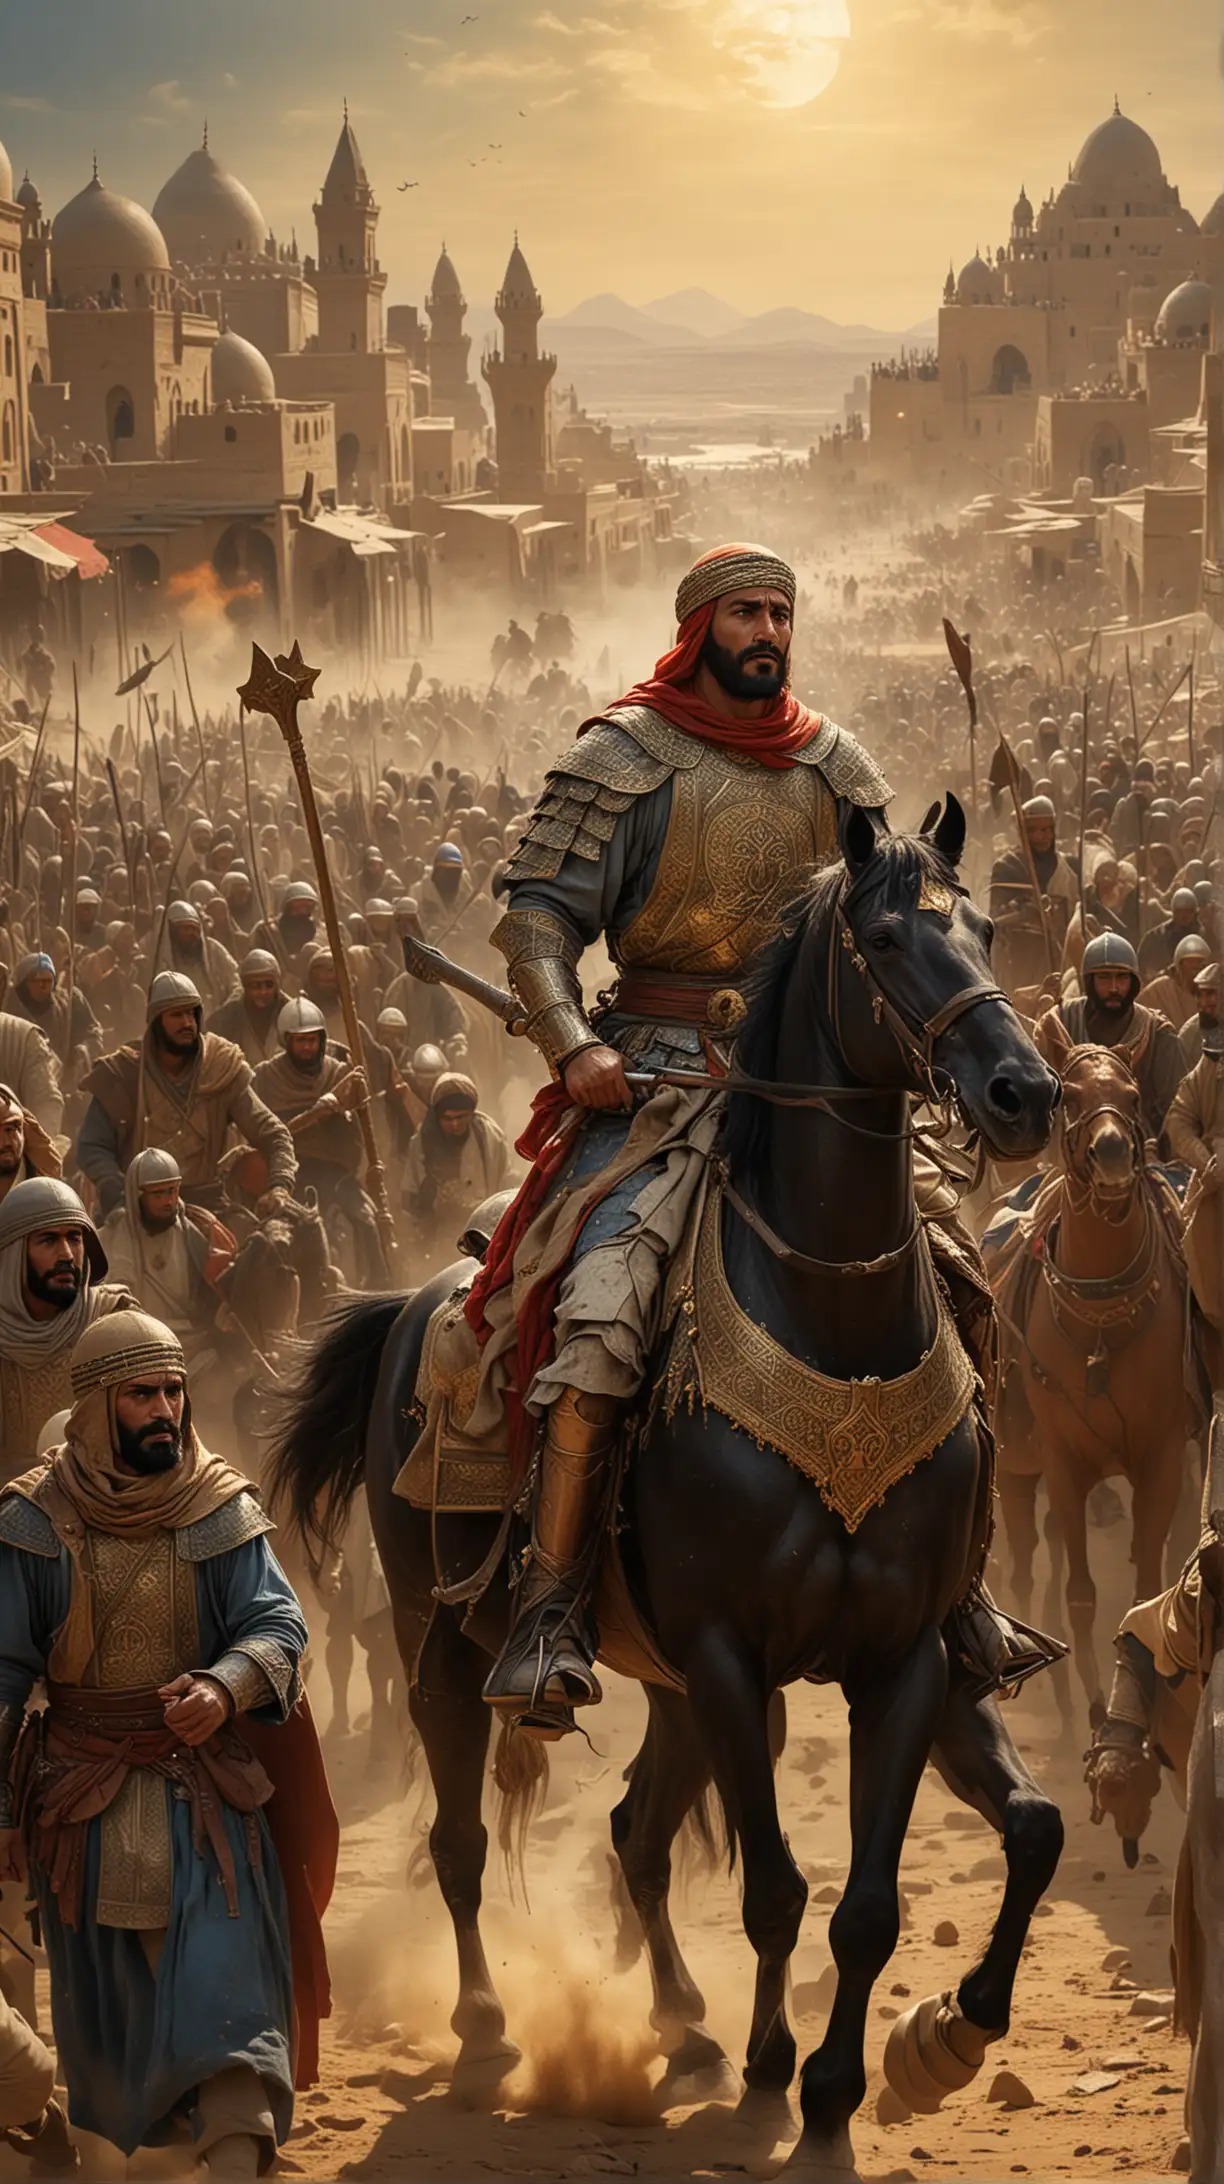 Central Figure:

Sultan Baybars: Depict him in the center, wearing traditional 13th-century mamluq armor, complete with intricate designs. He should be holding a sword, showcasing his powerful and authoritative presence. His facial expression should convey determination and wisdom.
Background Elements:

Left Side: The battlefield of Ain Jalut. Show the chaos of the 1260 battle against the Mongols with warriors in combat, dust clouds rising, and the intensity of the fight.
Right Side: The grandeur of medieval Cairo. Highlight architectural marvels like mosques and fortresses he commissioned, bustling market scenes, and the vibrant 13th-century city life.
Top Background: The Egyptian desert with pyramids, symbolizing the land he ruled and protected.
Symbolic Elements:

Crescent Moon and Star: Subtly incorporated into the design, representing Islam and his legacy.
Historical Artifacts: Elements such as ancient scrolls, maps, or artifacts to signify his contributions and the era he lived in.
Color Palette:

Rich golds, deep blues, and earthy tones to reflect the historical and regal themes.
Lighting and Effects:

Dramatic lighting to highlight Baybars and create depth in the background scenes.
Subtle light rays or glow around Baybars to emphasize his importance and heroism.
Overall Mood:

An epic historical feel, highlighting the heroism and dramatic rise of Baybars from a captured slave to a powerful and revered sultan.